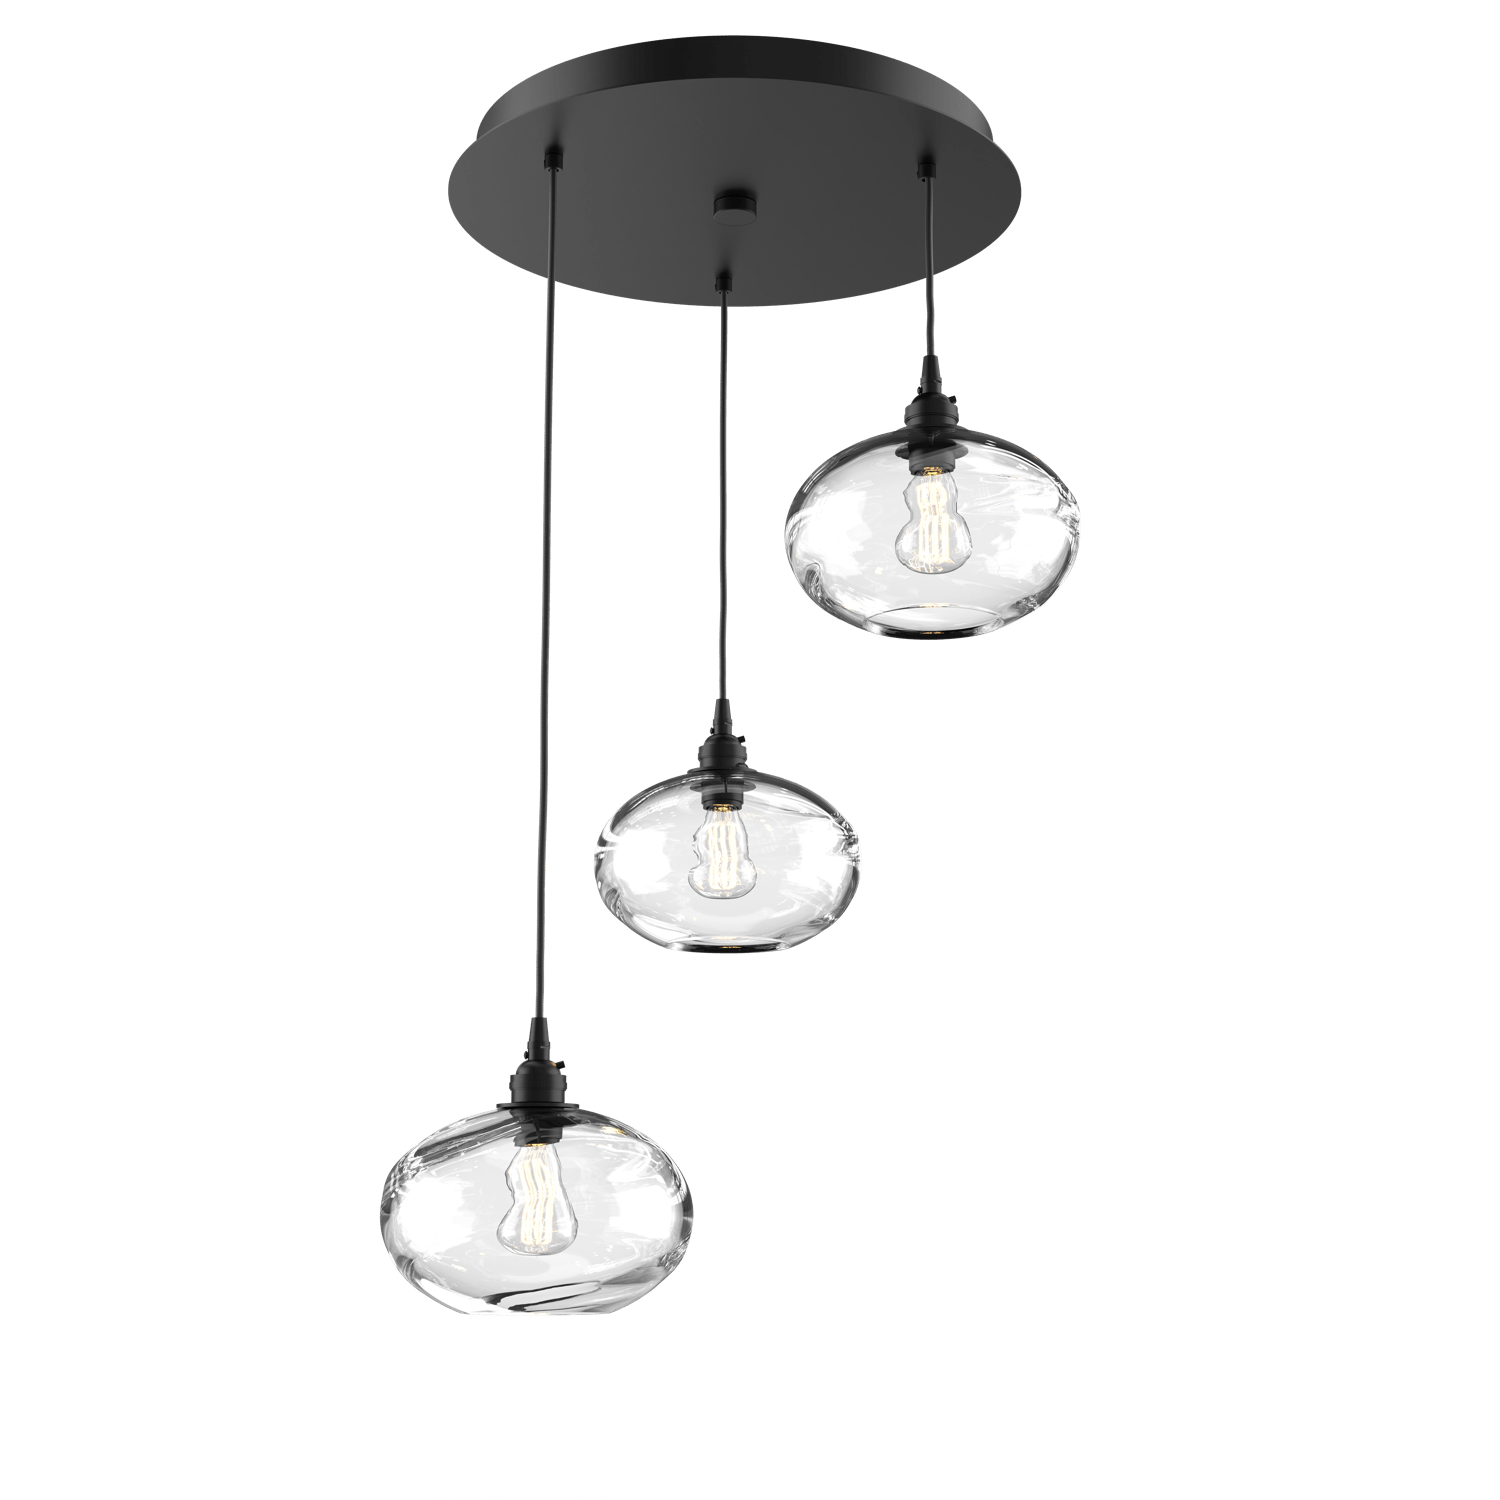 CHB0036-03-MB-OC-Hammerton-Studio-Optic-Blown-Glass-Coppa-3-light-round-pendant-chandelier-with-matte-black-finish-and-optic-clear-blown-glass-shades-and-incandescent-lamping